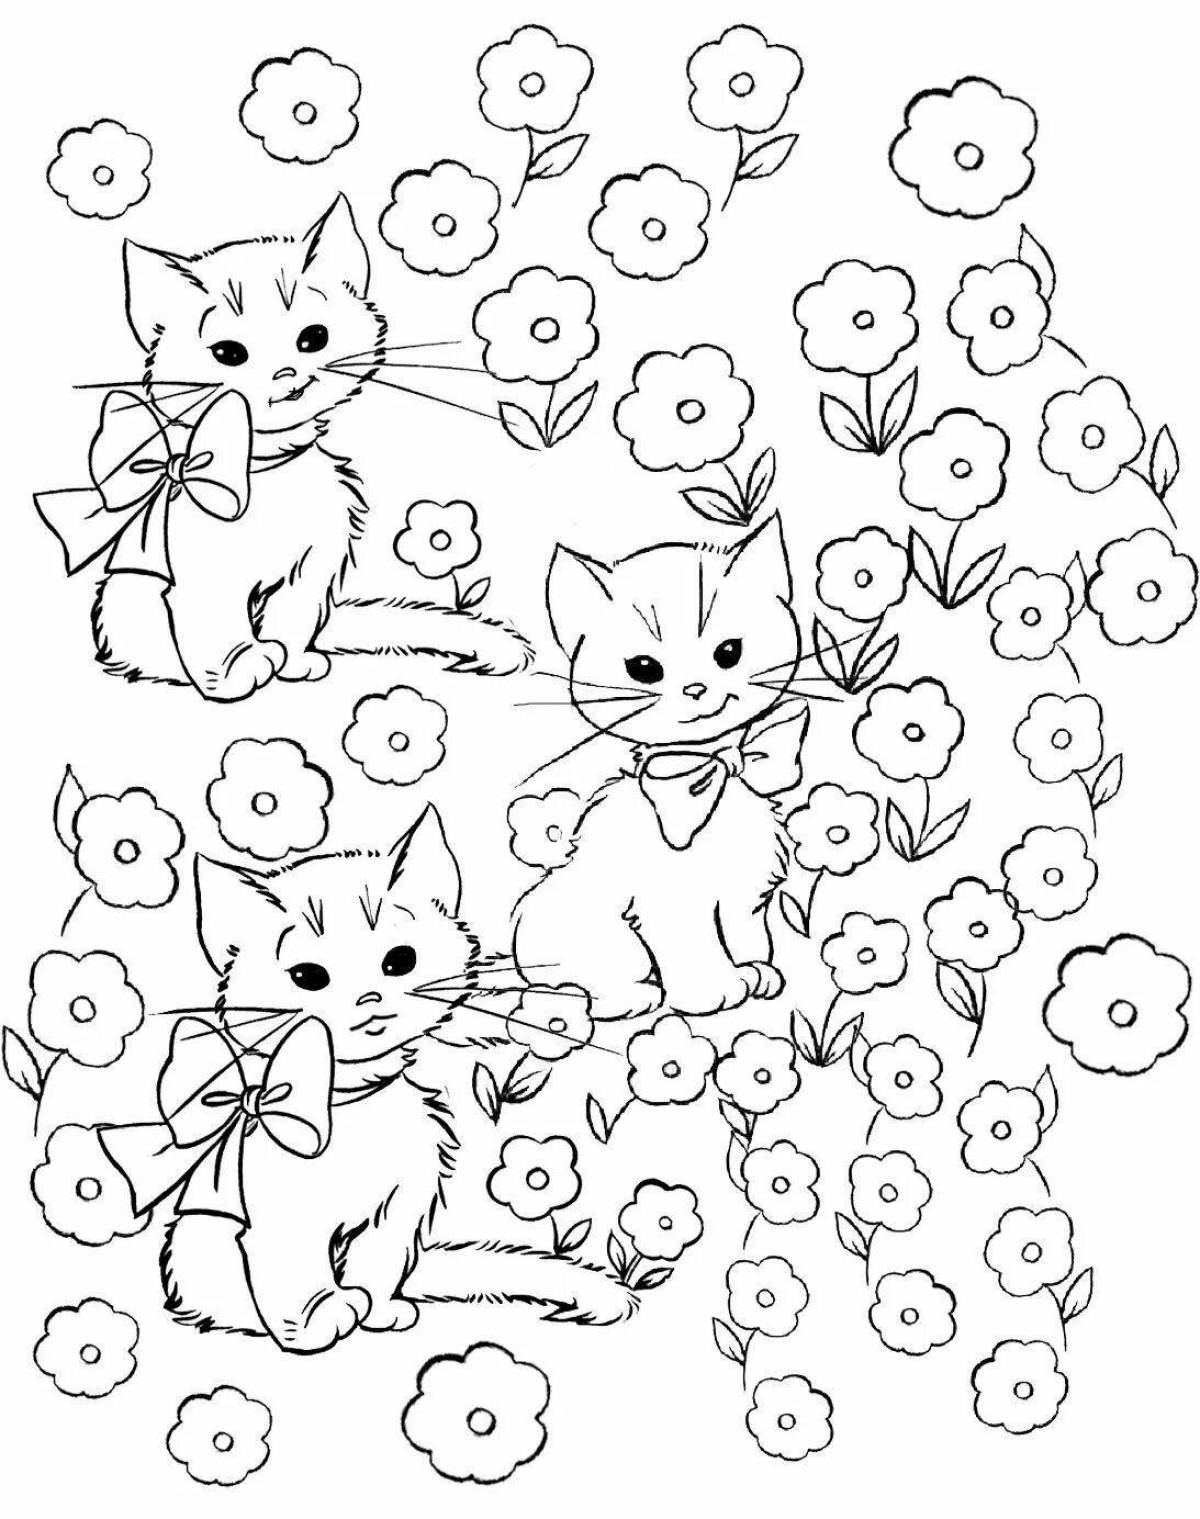 Coloring funny little cats